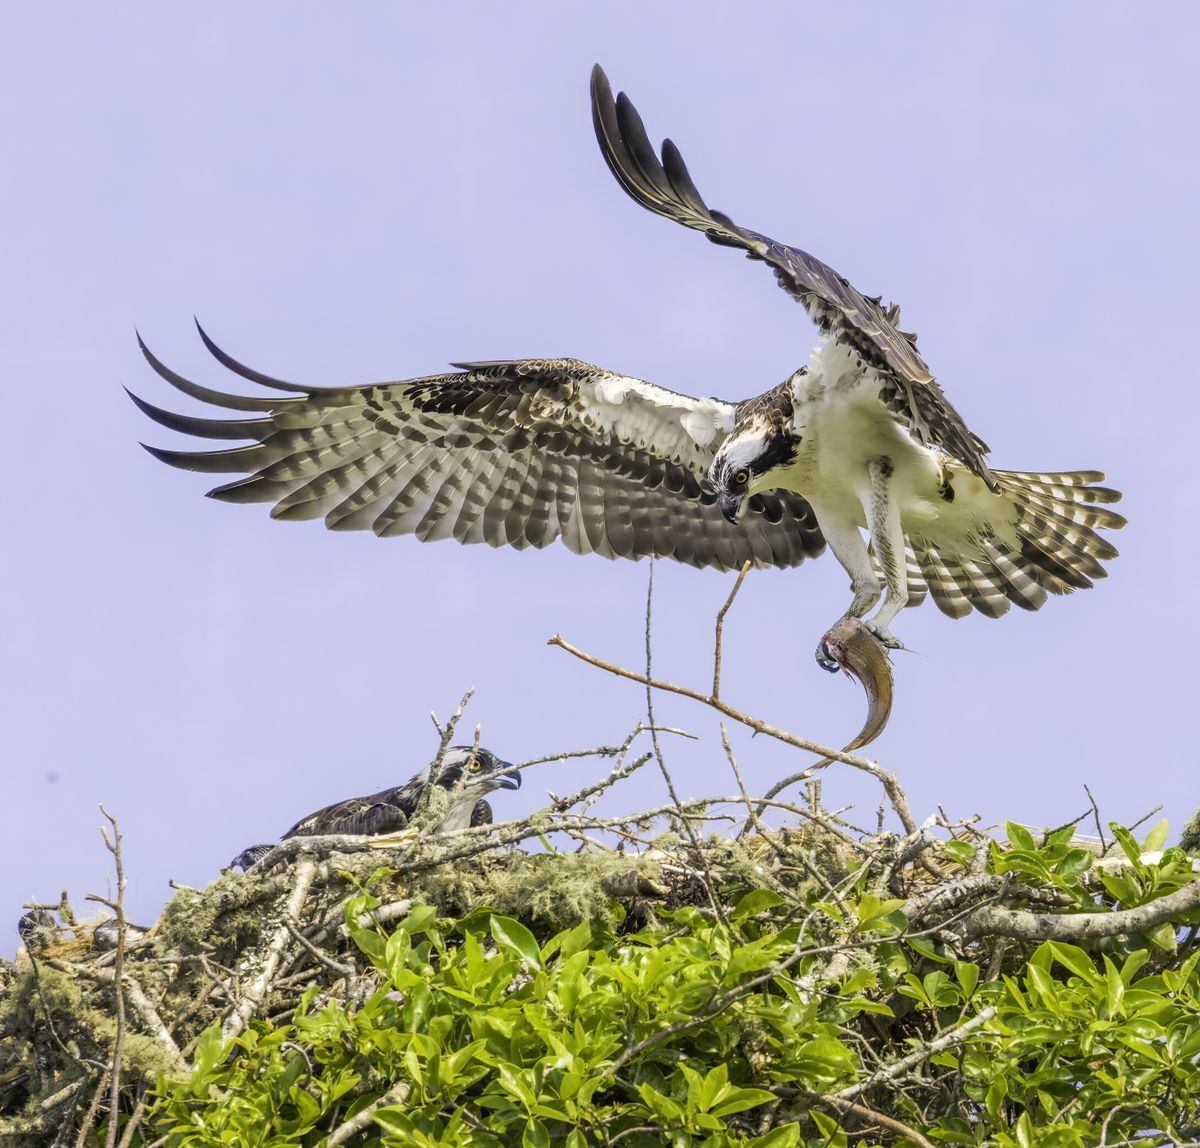 An Osprey bringing a fish to the nest with another Osprey in the nest